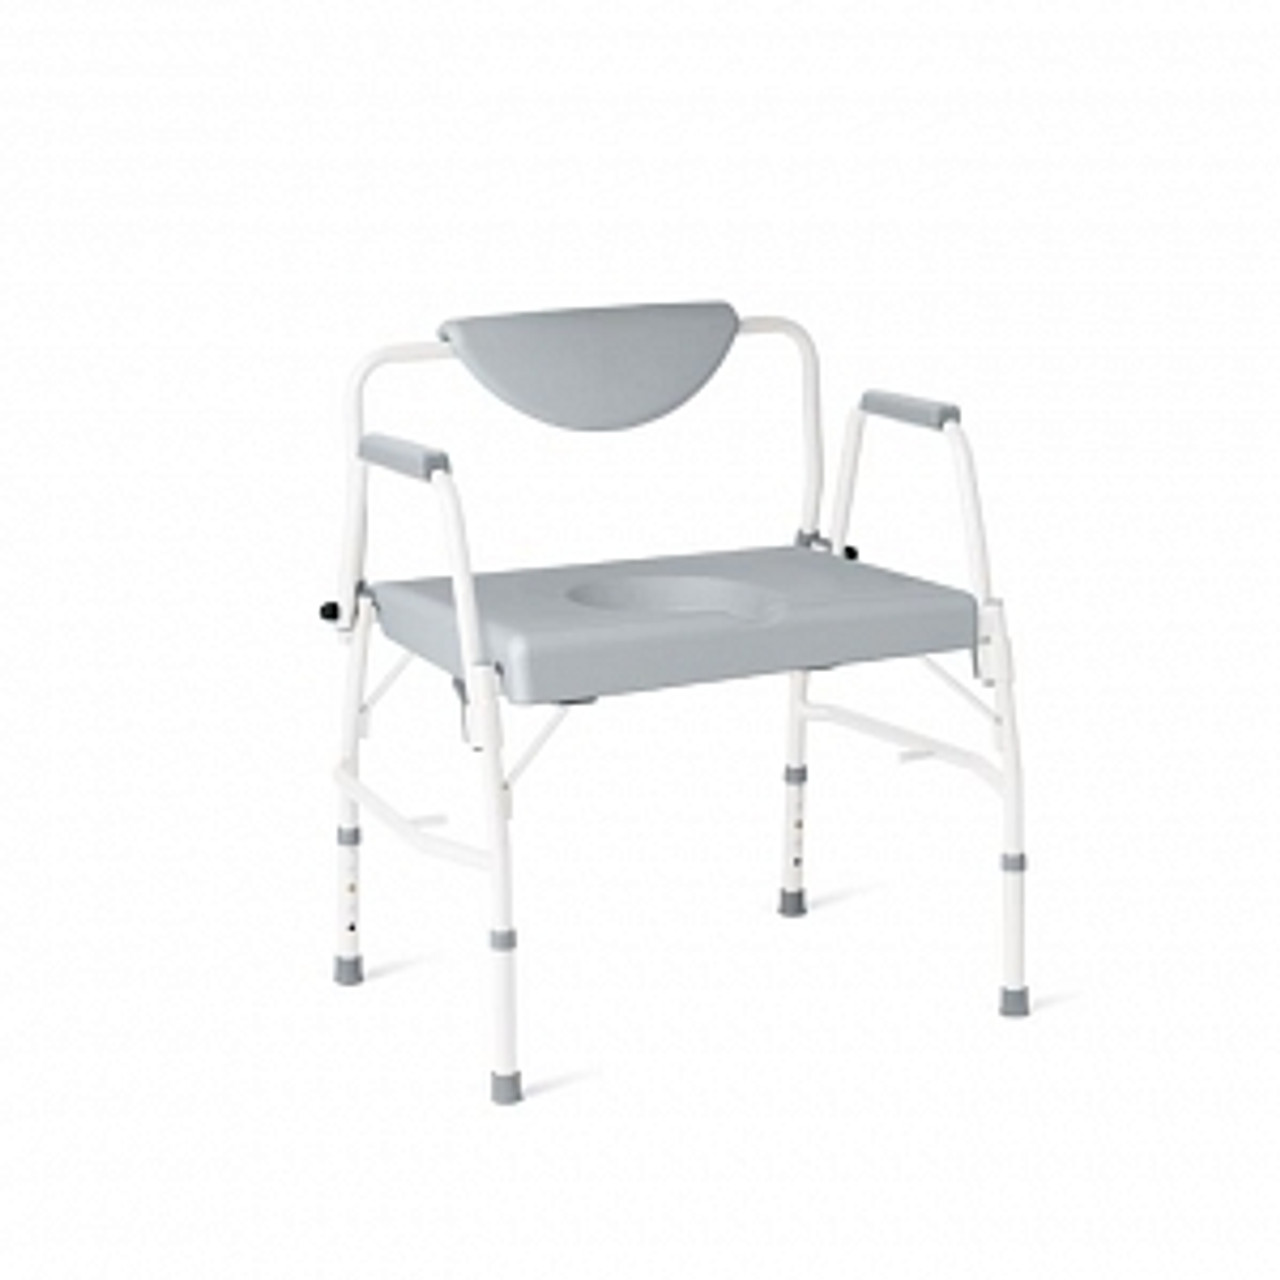 Bariatric commode with easy-to-release drop-arm mechanism allows larger patients to laterally transfer safely and with ease
Powder-coated steel frame is rust-resistant and is reinforced for greater weight-bearing capability
Comes with pail, lid, and solid seat
1,000 lb. weight capacity, seat height 17.5"-21.5", seat depth 18.5", inside arm width 25", overall width 31"
Does not come in retail packaging